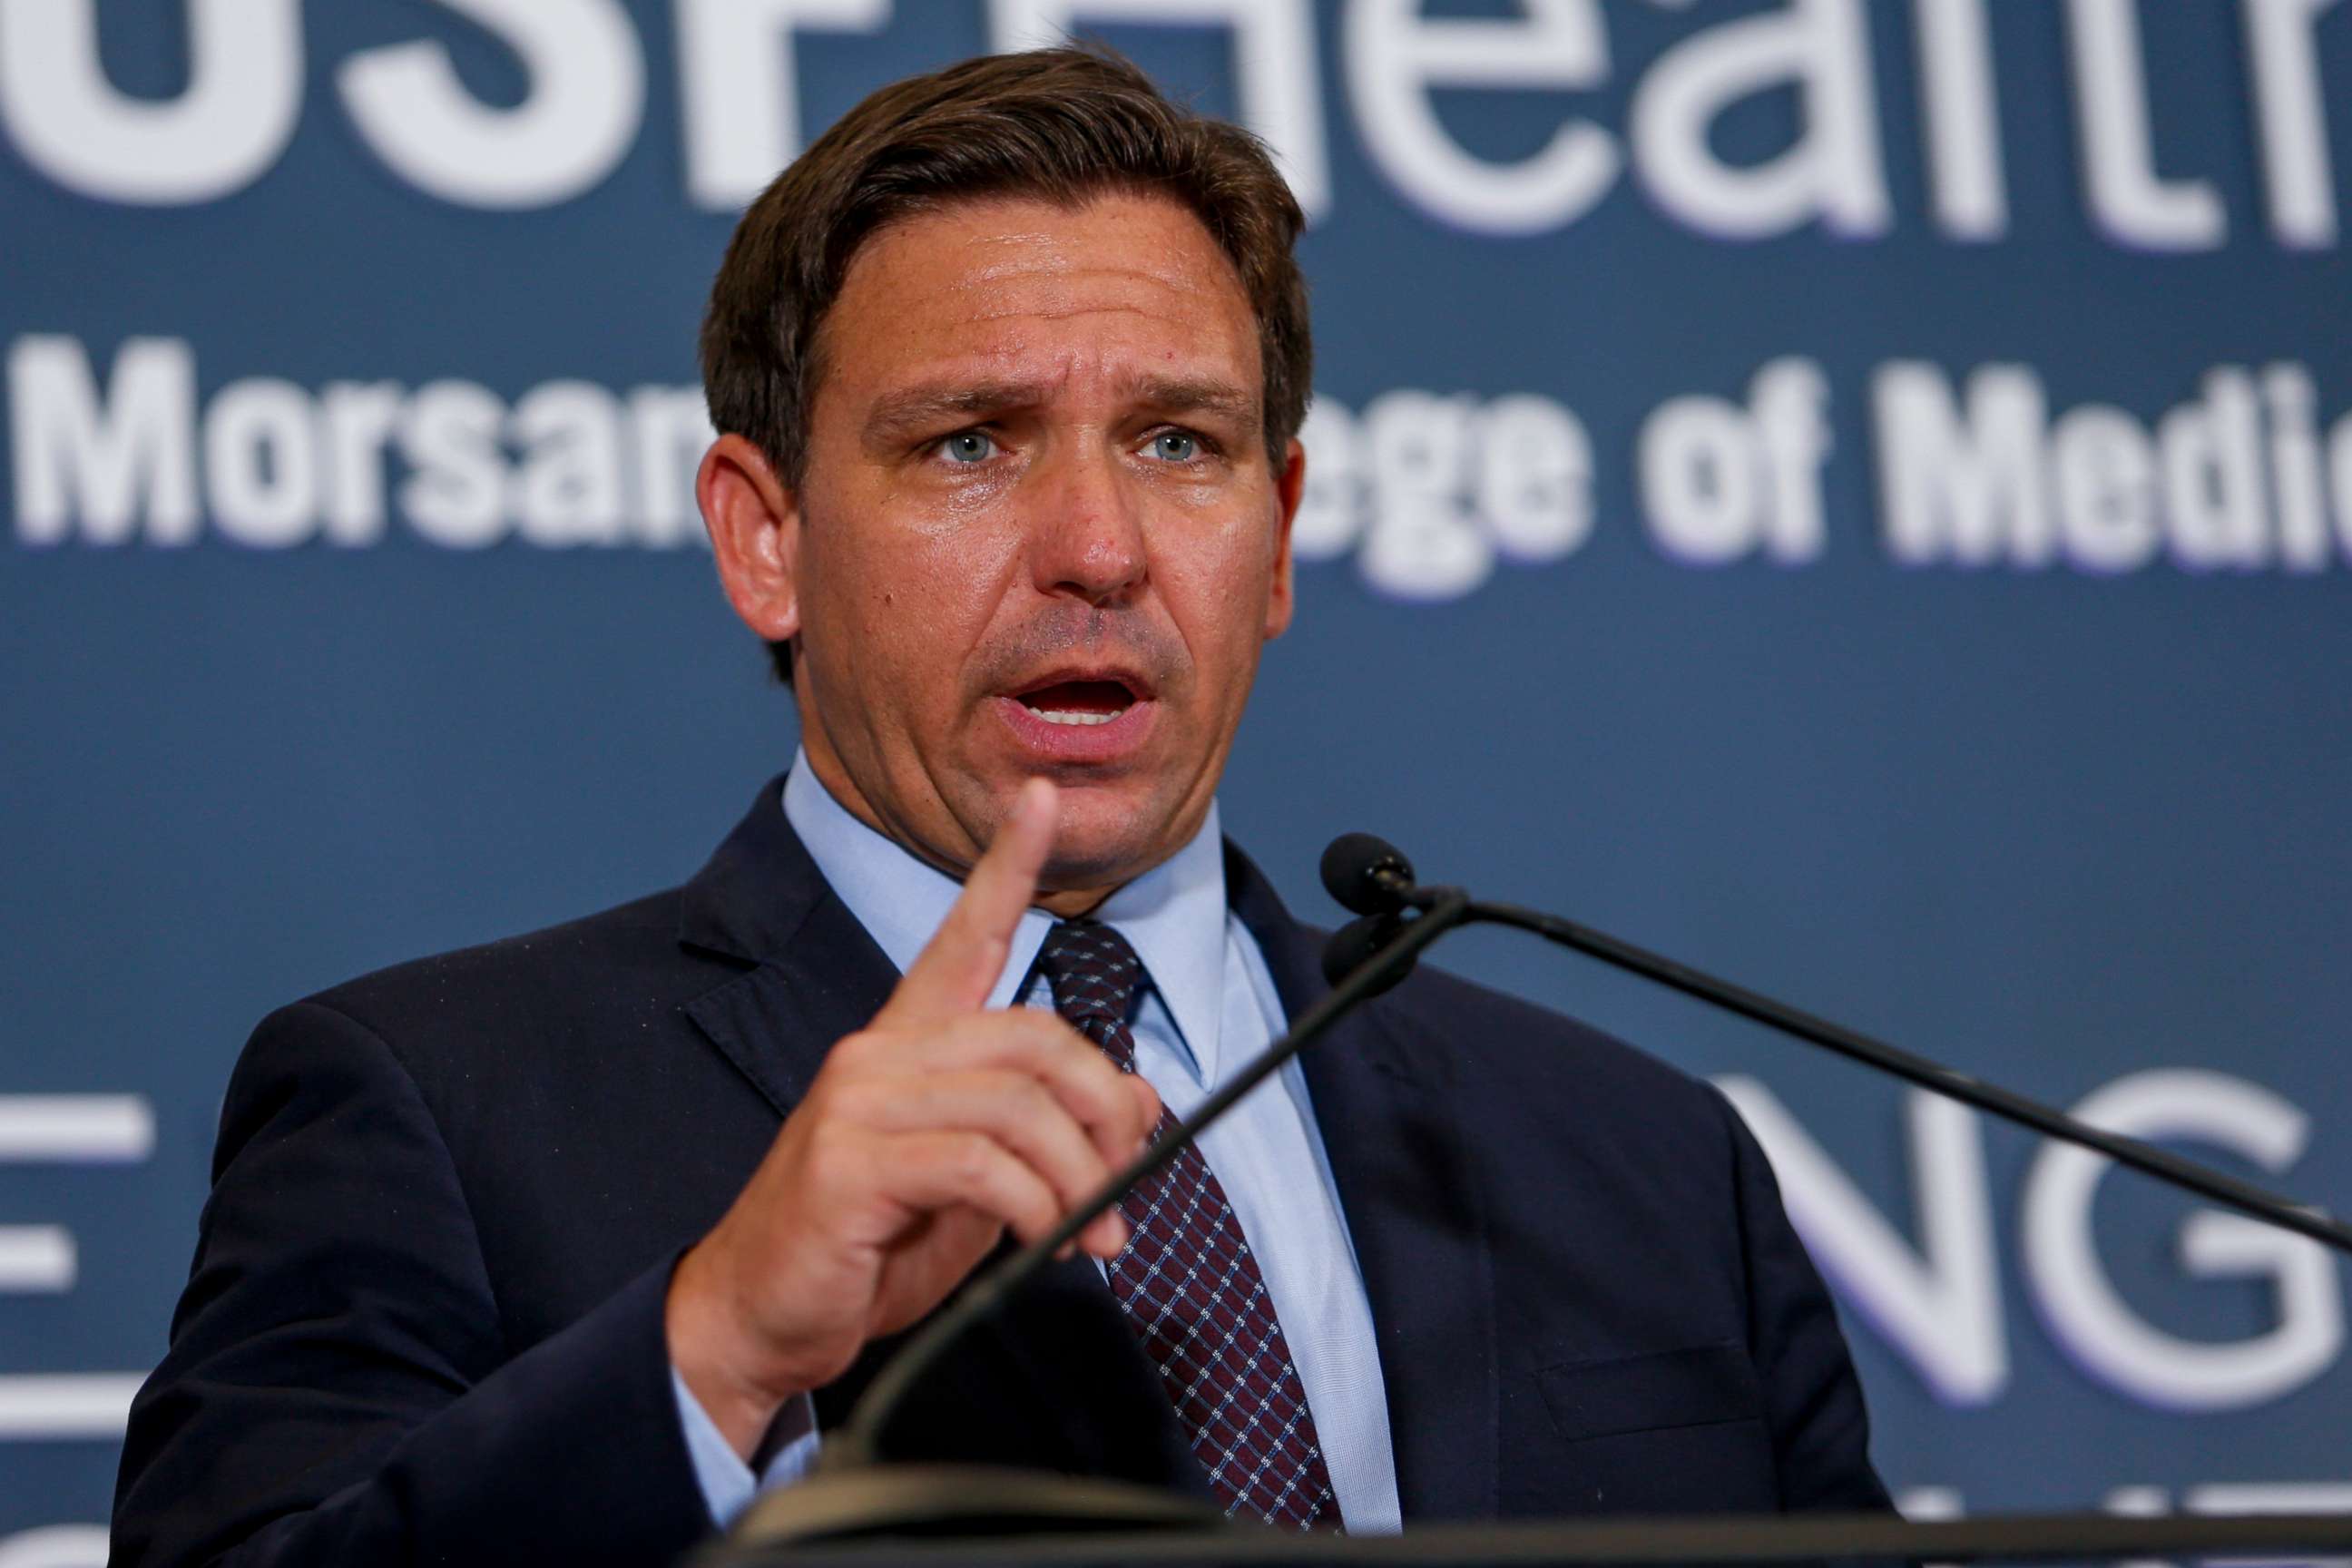 PHOTO: Gov. Ron DeSantis takes questions during a press conference at Tampa General Hospital and USF Health Morsani College of Medicine's Global Emerging Diseases Institute in Tampa, Fla., Aug. 6, 2021.